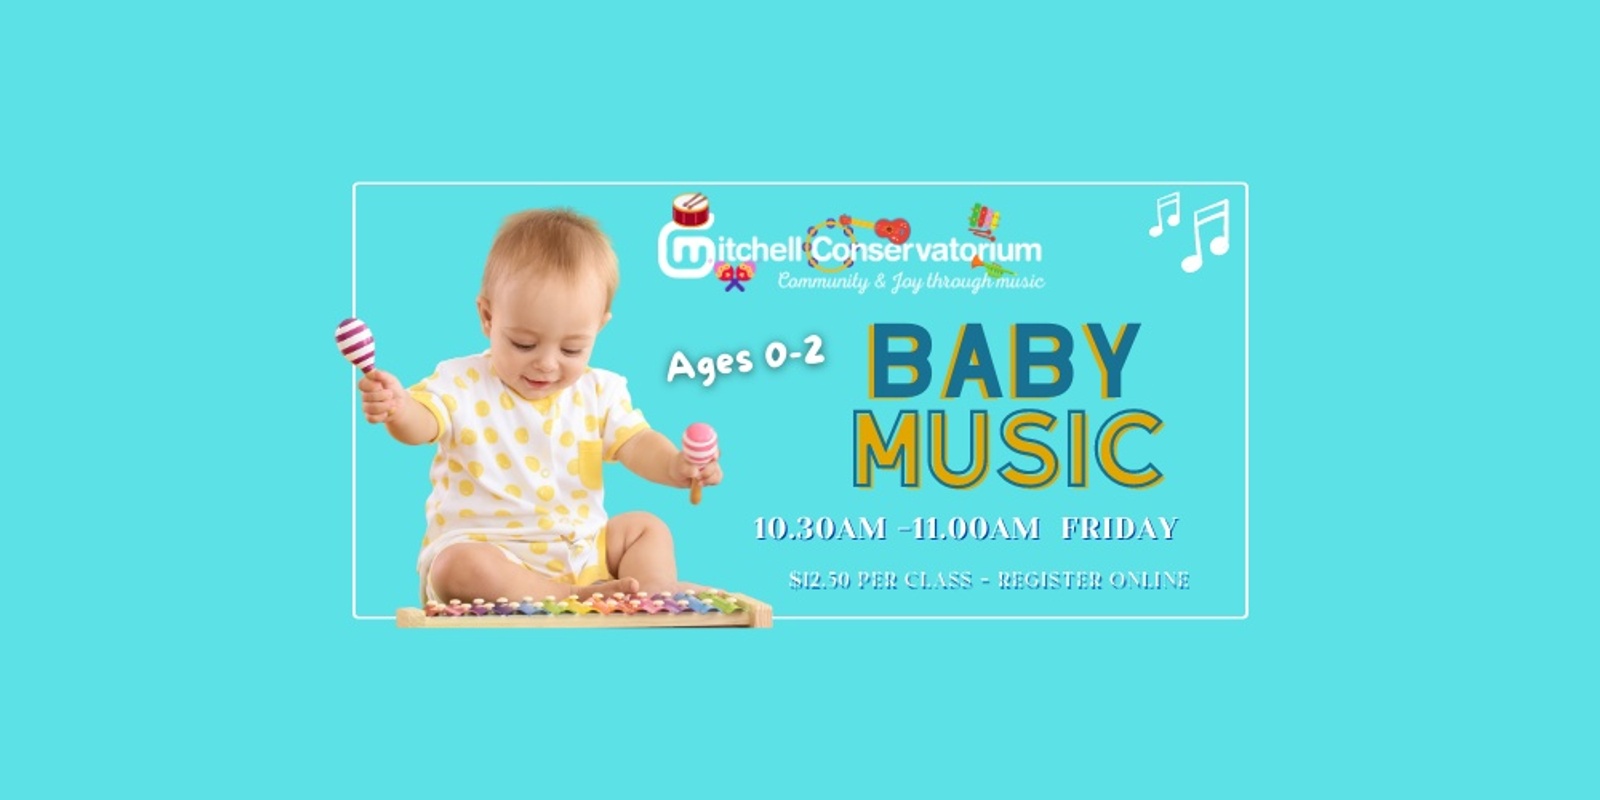 EARLY CHILDHOOD MUSIC - Babies Music 0-2 years Friday